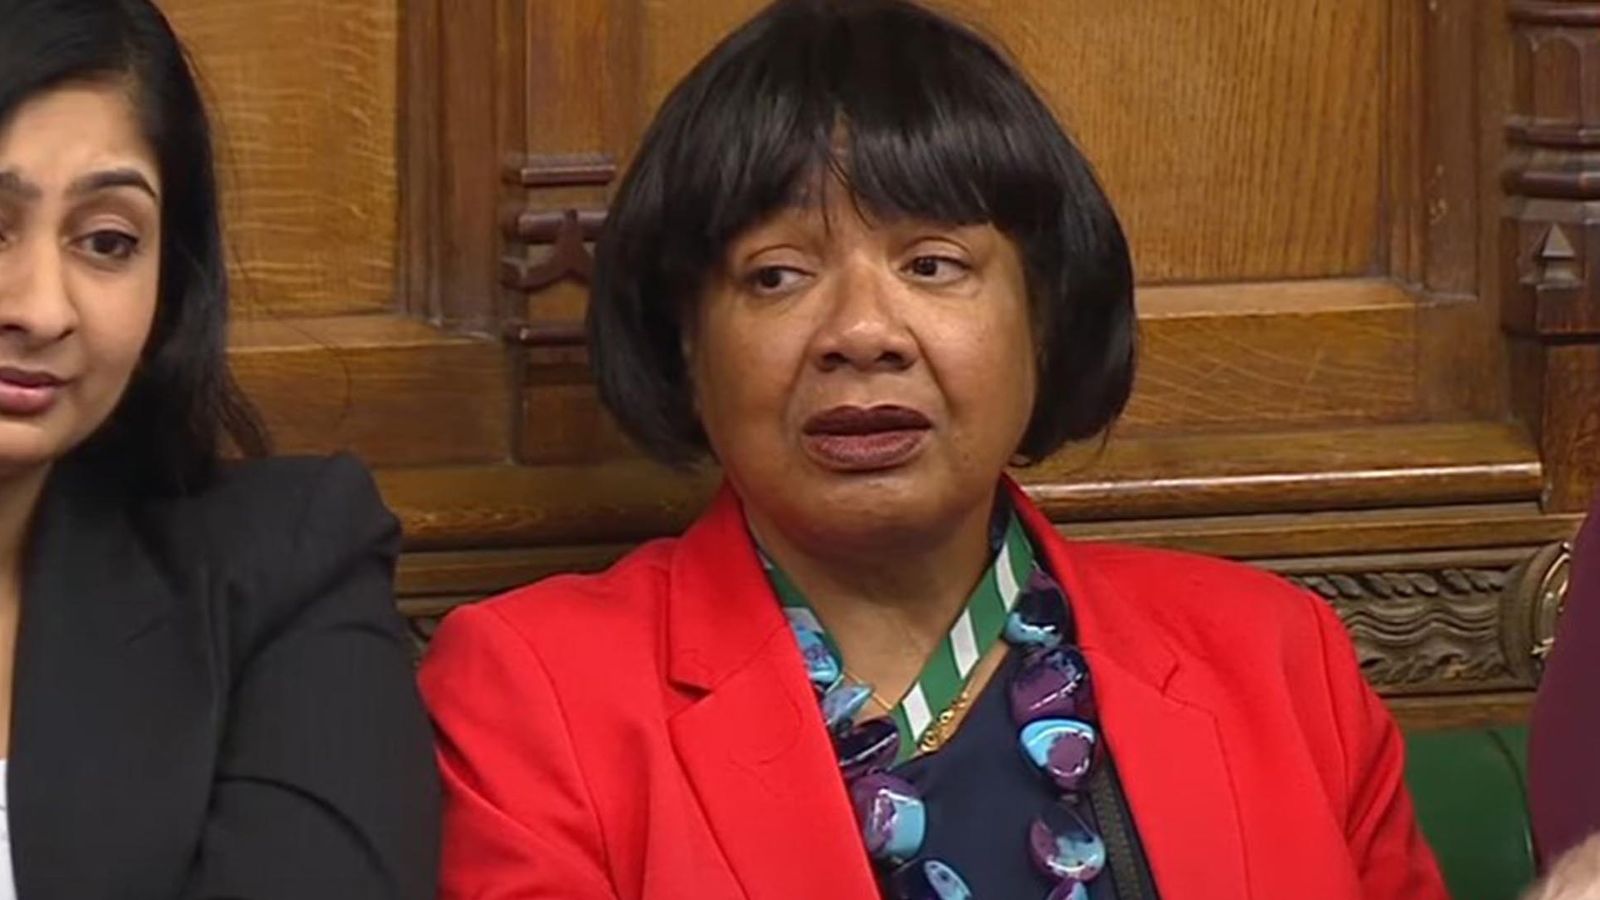 Diane Abbott hits out at Speaker Lindsay Hoyle after not being called to speak at PMQs during racism debate